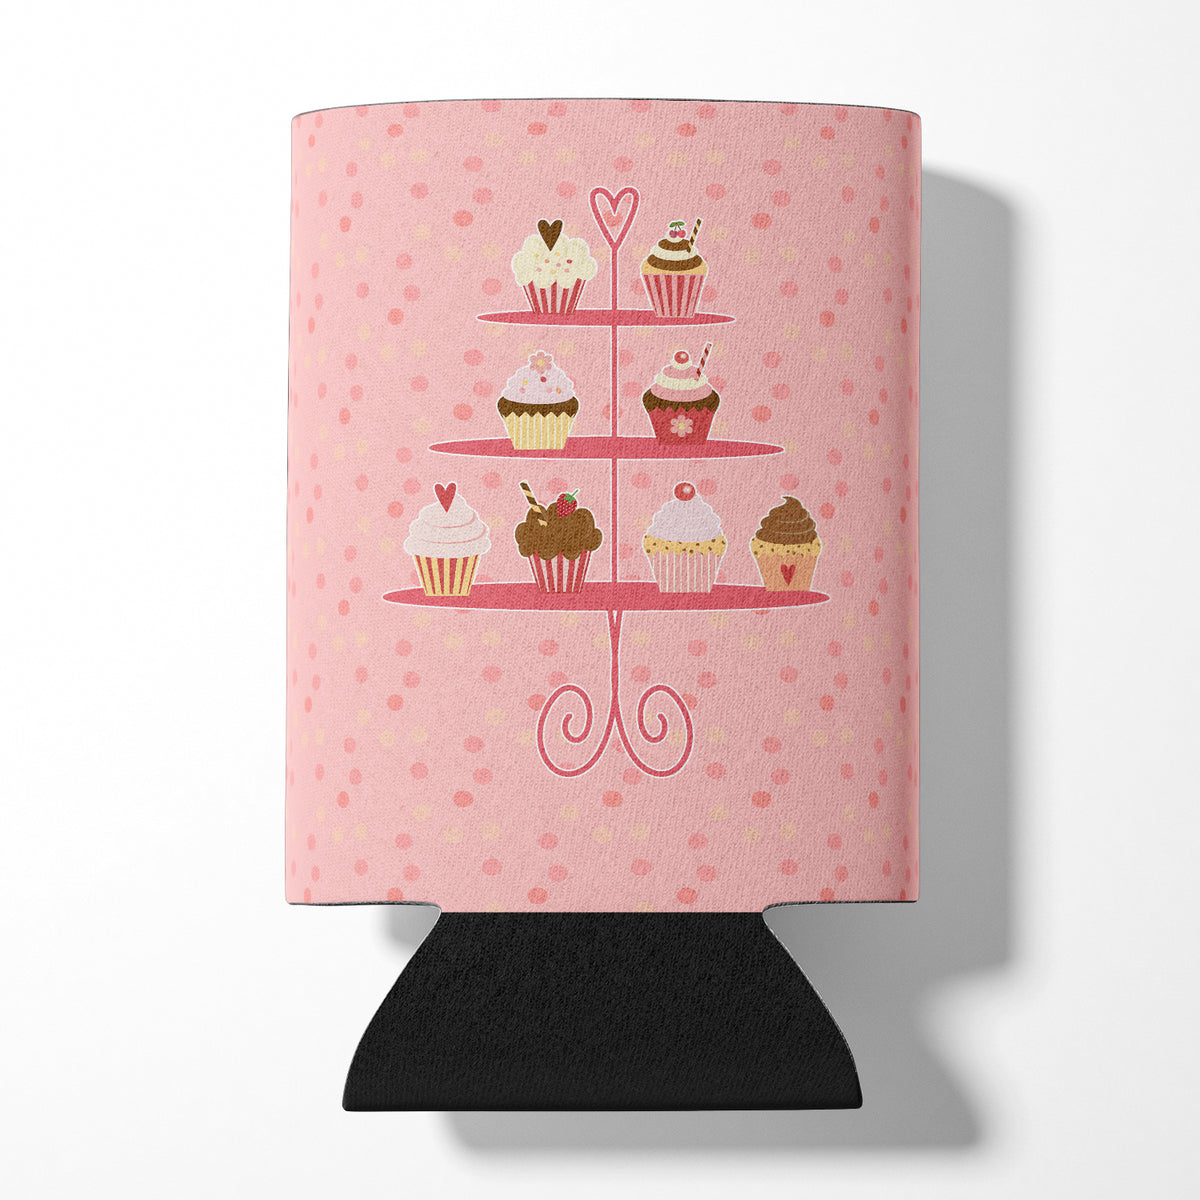 Cupcakes 3 Tier Pink Can or Bottle Hugger BB7274CC  the-store.com.